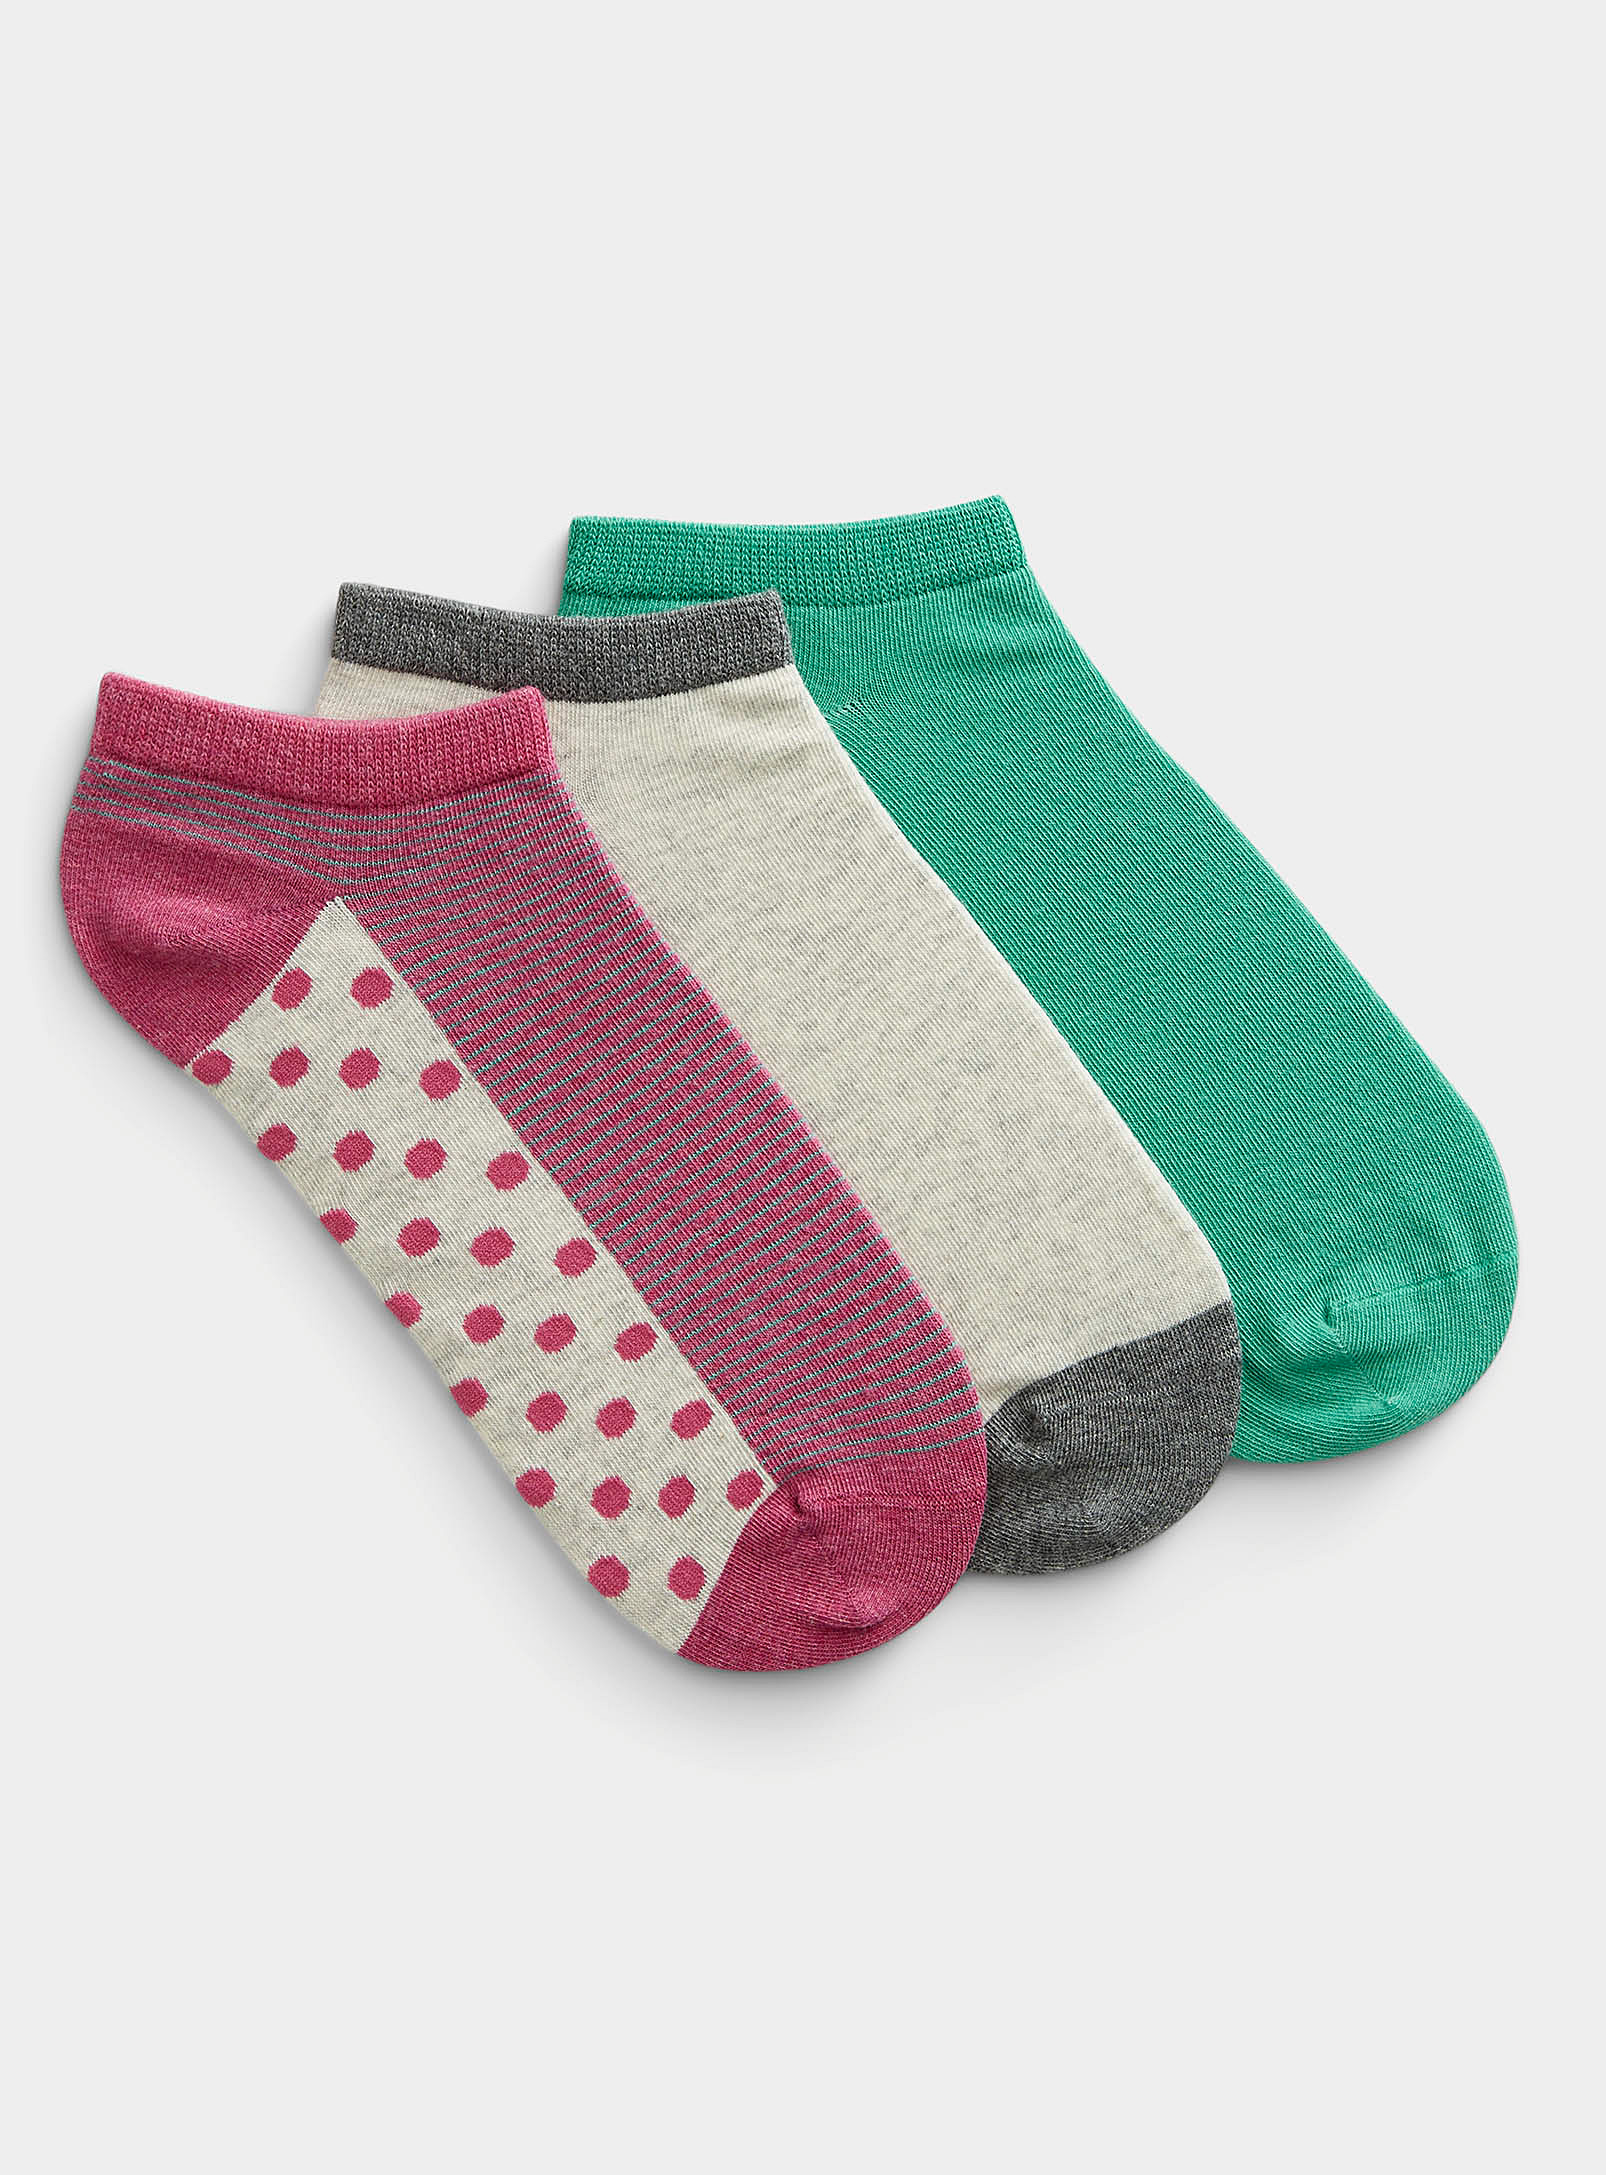 Simons - Women's Colourful foot liners Set of 3